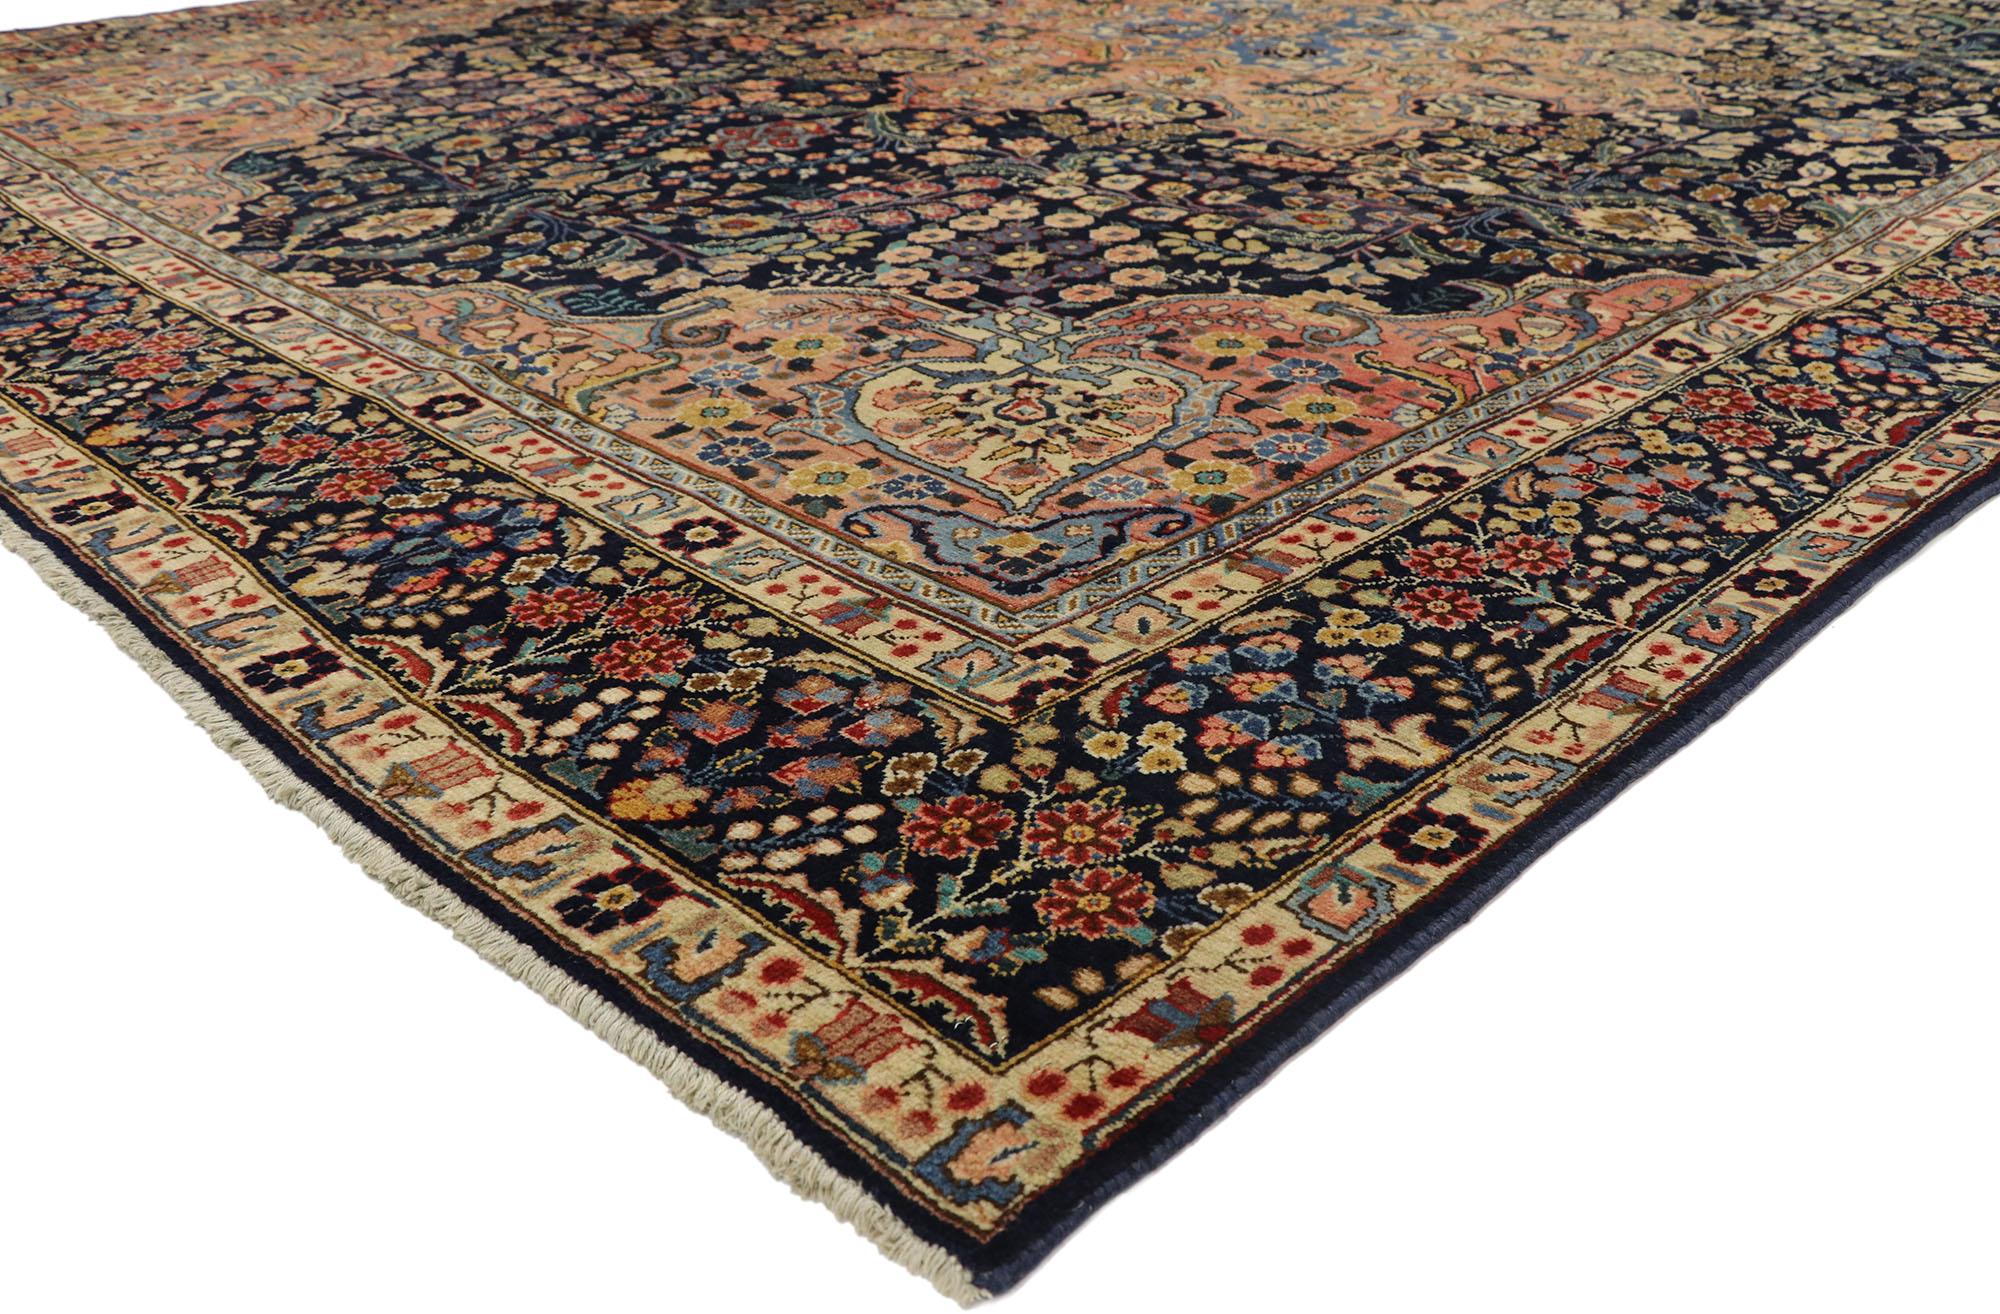 Resplendent with traditional style, this antique Tabriz rug handsomely communicates some of the finer points of eccentric Persian rug design. Featuring a grand border and an exquisite all-over floral pattern rendered in a stunning selection of